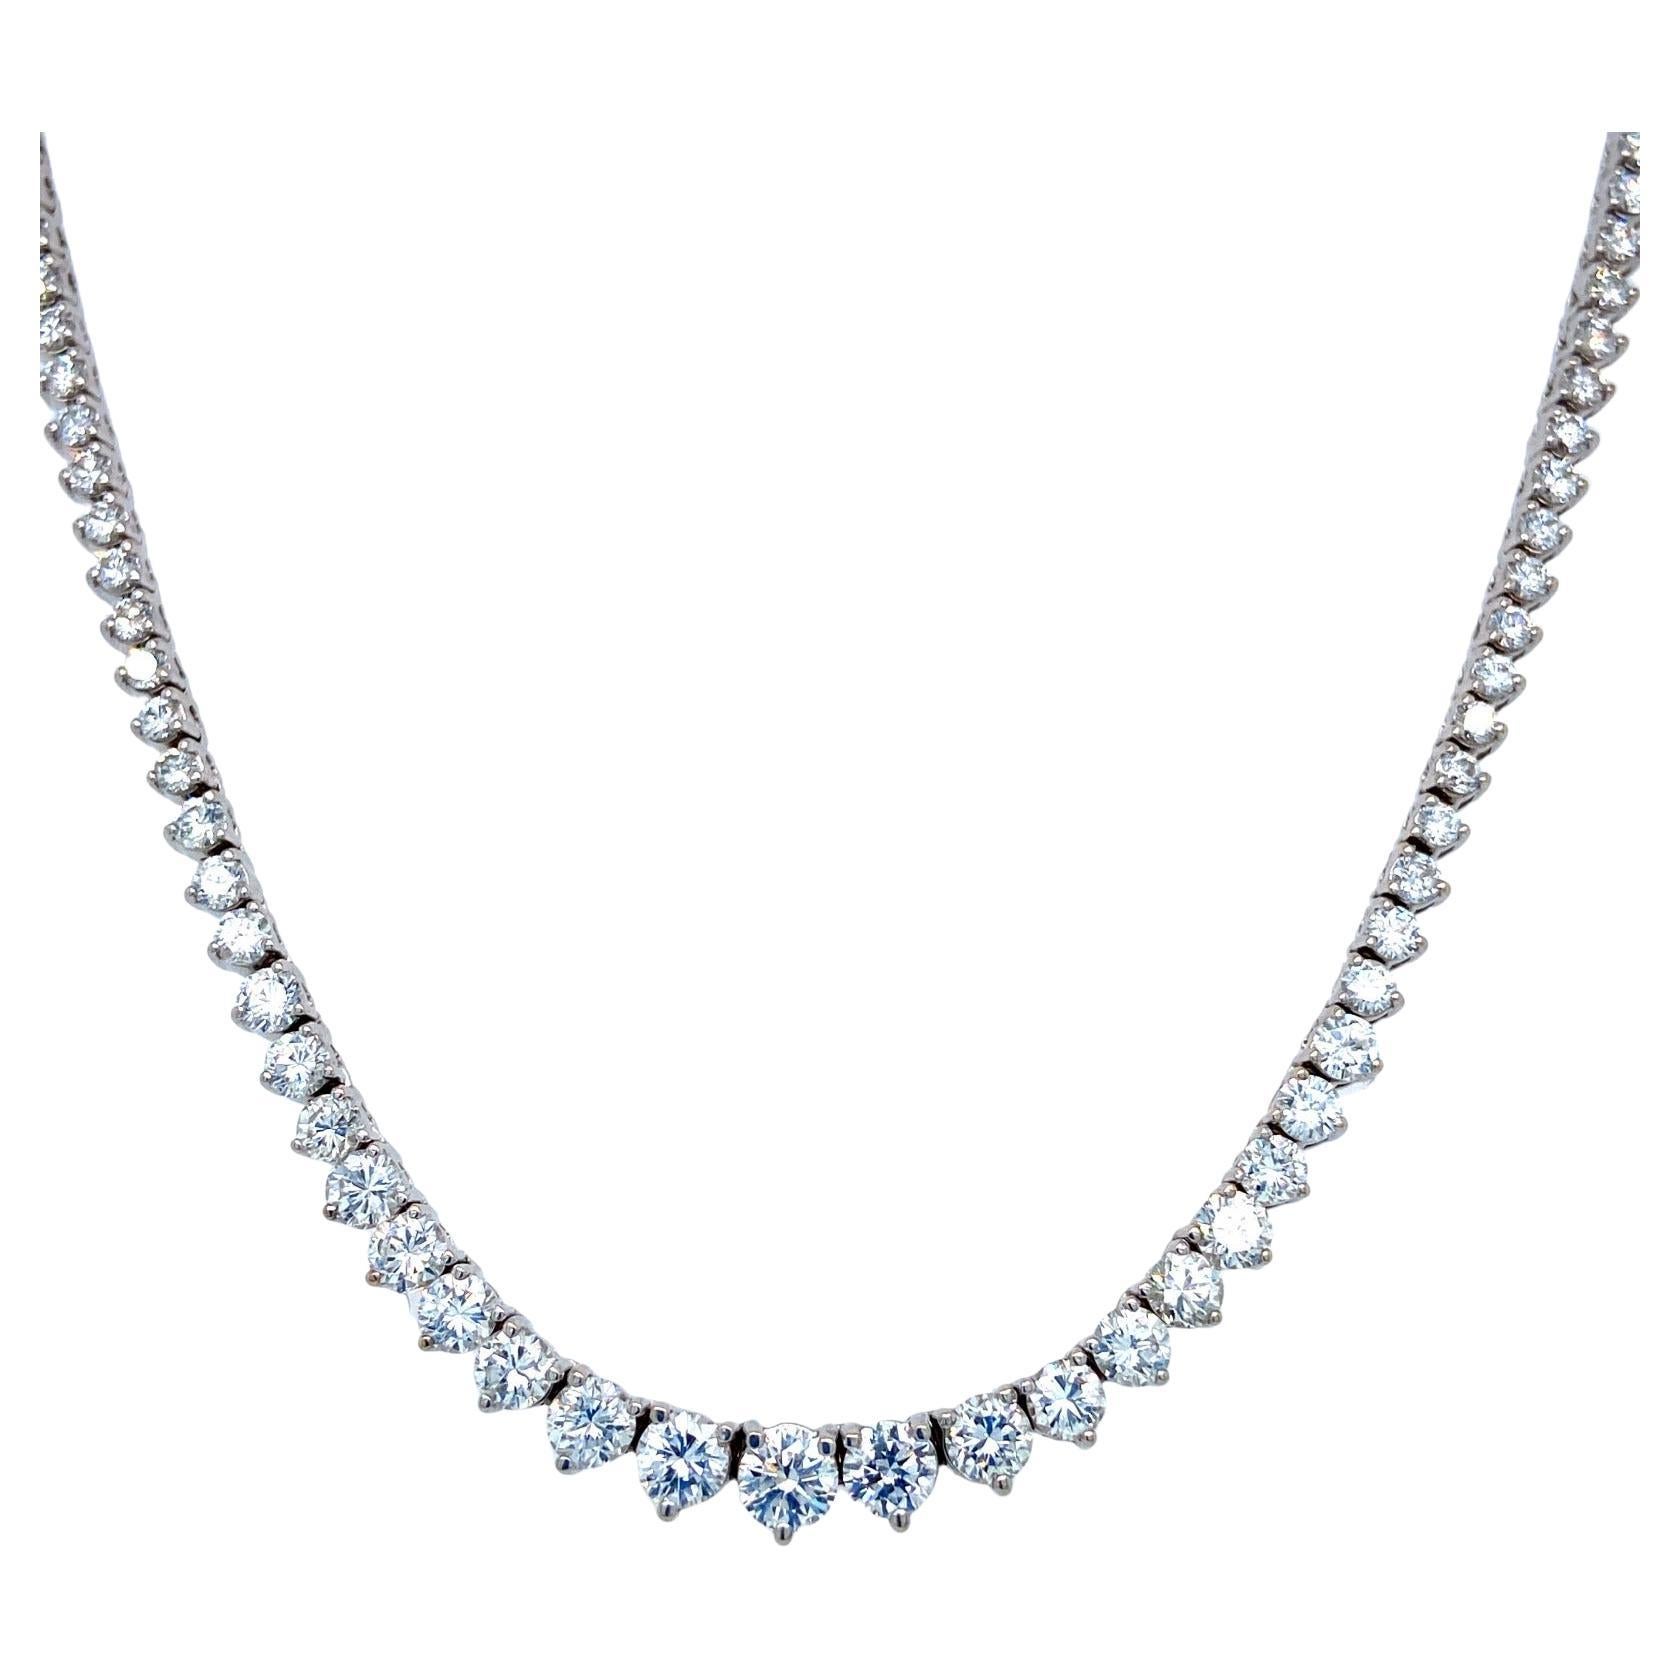 This exquisite graduated riviera necklace set in handmade 14k white gold featuring perfectly cut ideal round brilliant diamonds. the super white diamonds are in h/i color and VSi/vs2  clarity with a total carat weight of 14.55 carats This precious